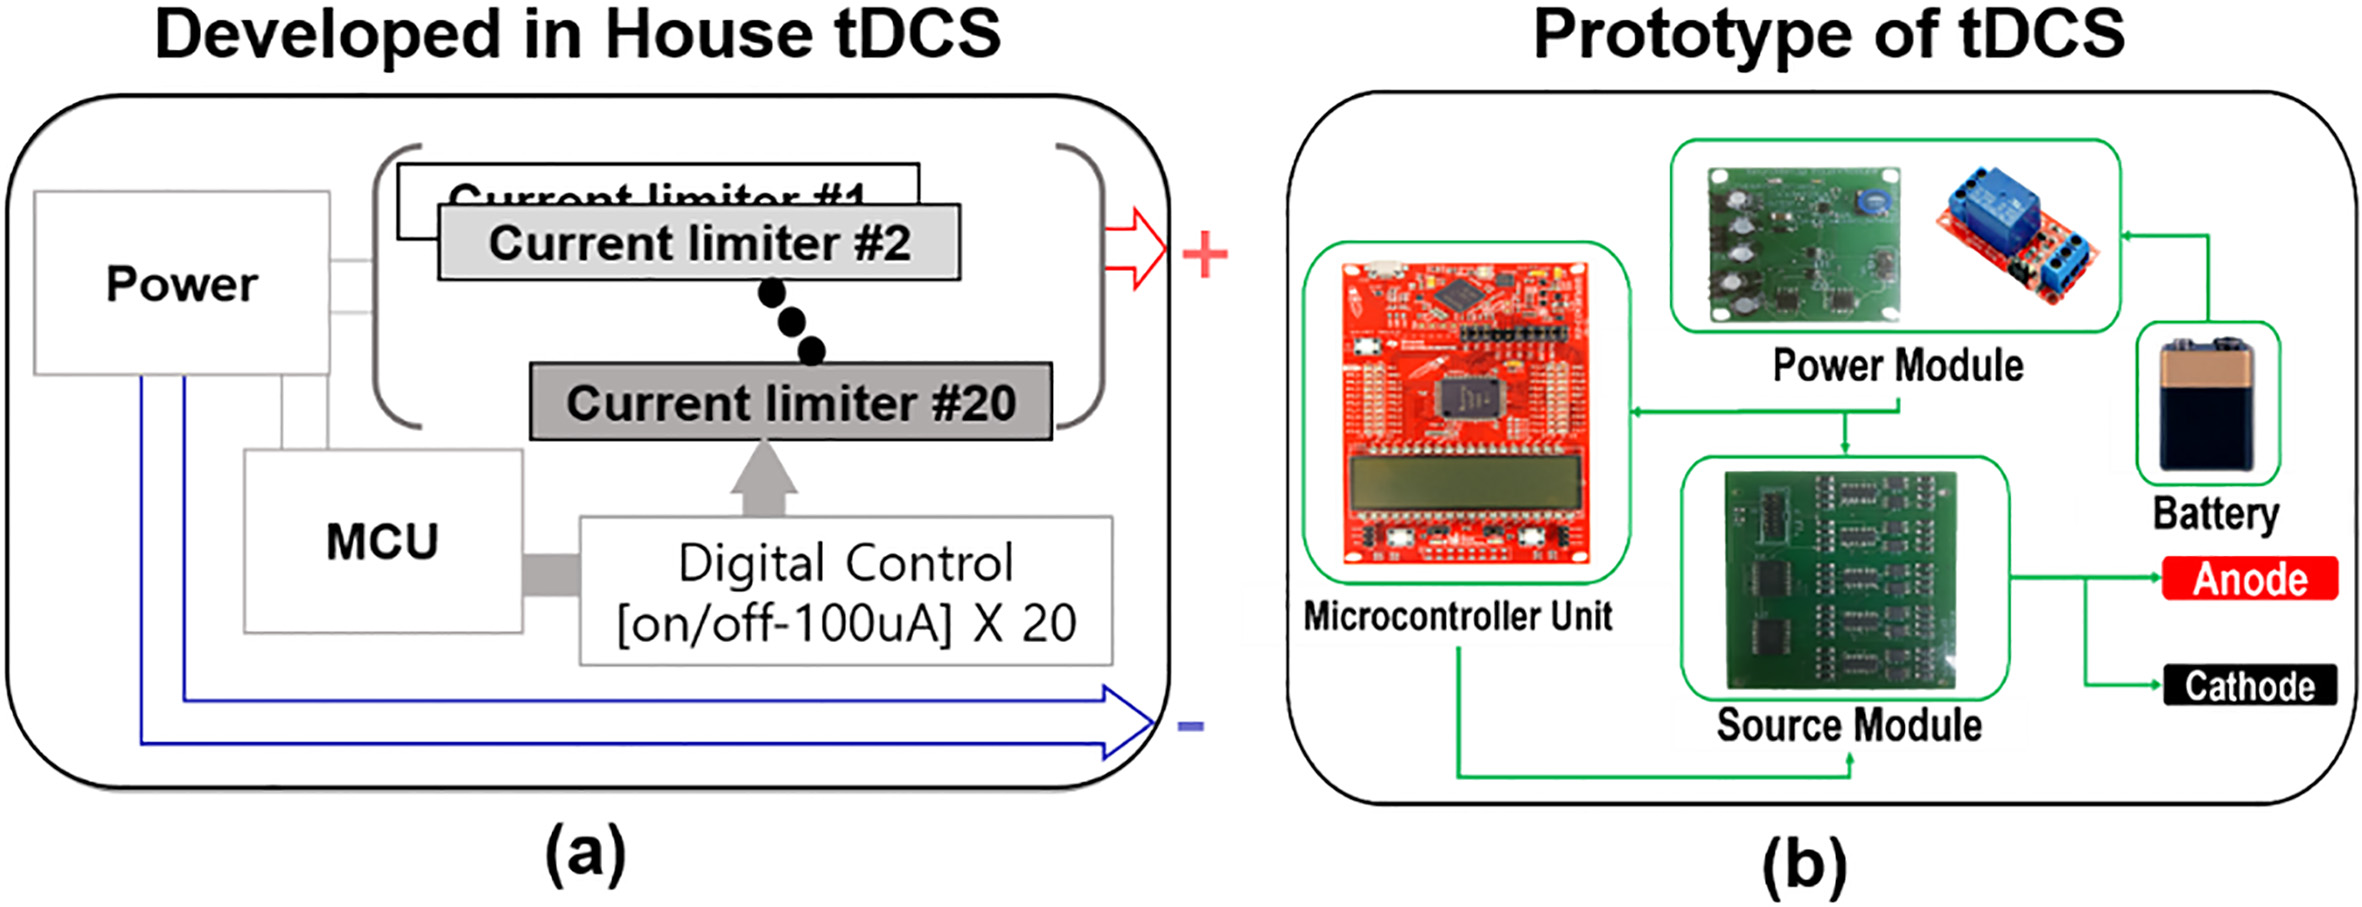 (a) Block diagram of a developed in-house tDCS system, and (b) picture of a developed in-house tDCS system.